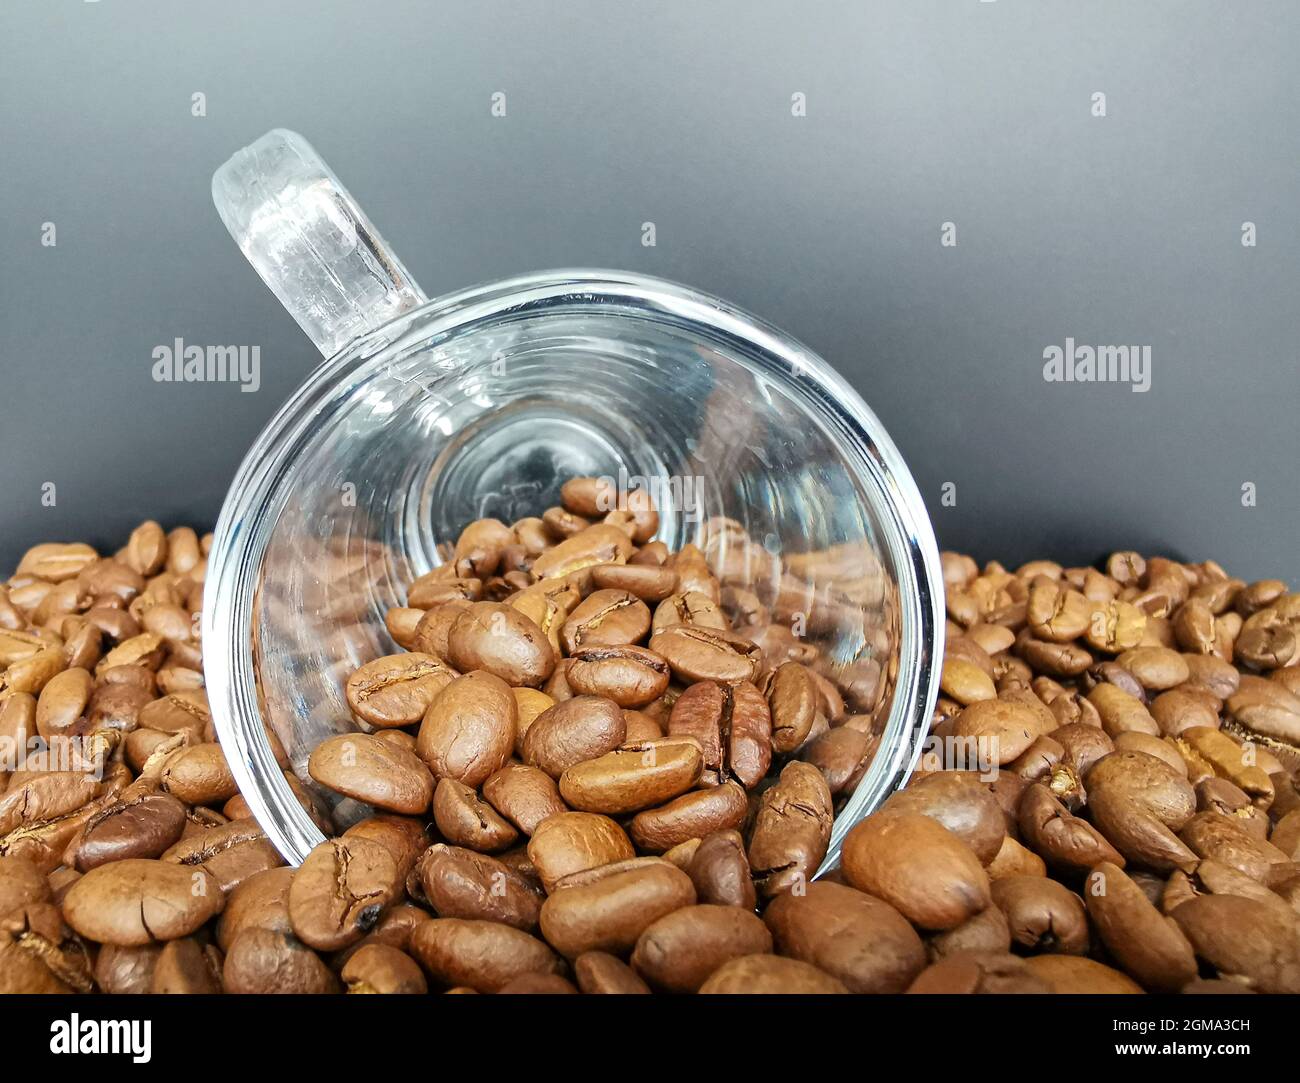 Closeup of a cup of coffee with roasted dark brown coffee beans Stock Photo